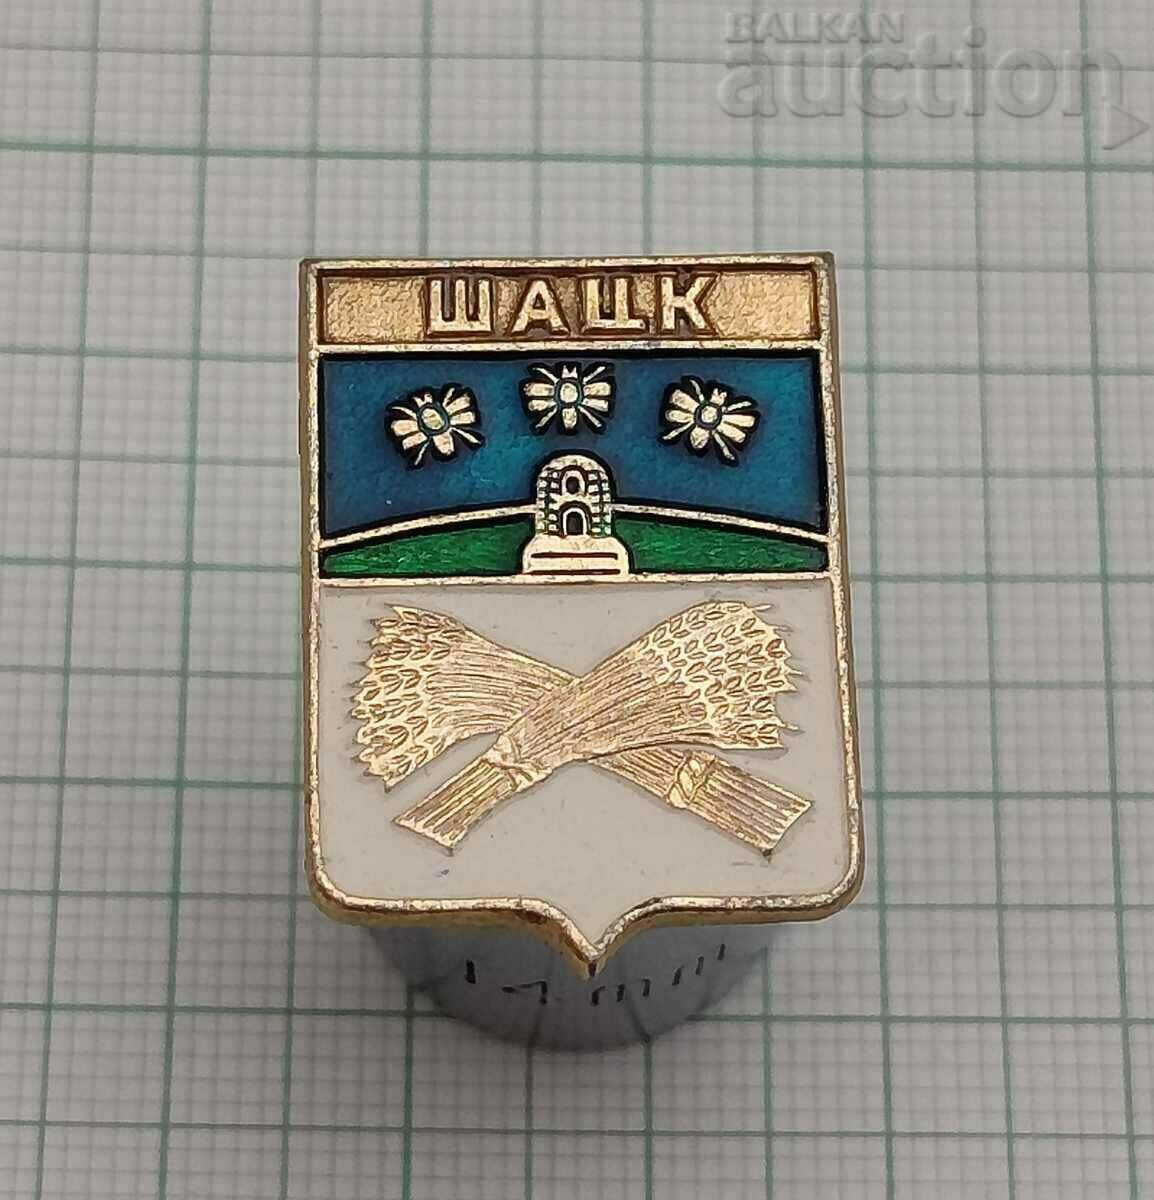 SHATCK BEES HIVE KOSHER COAT OF ARMS USSR BADGE